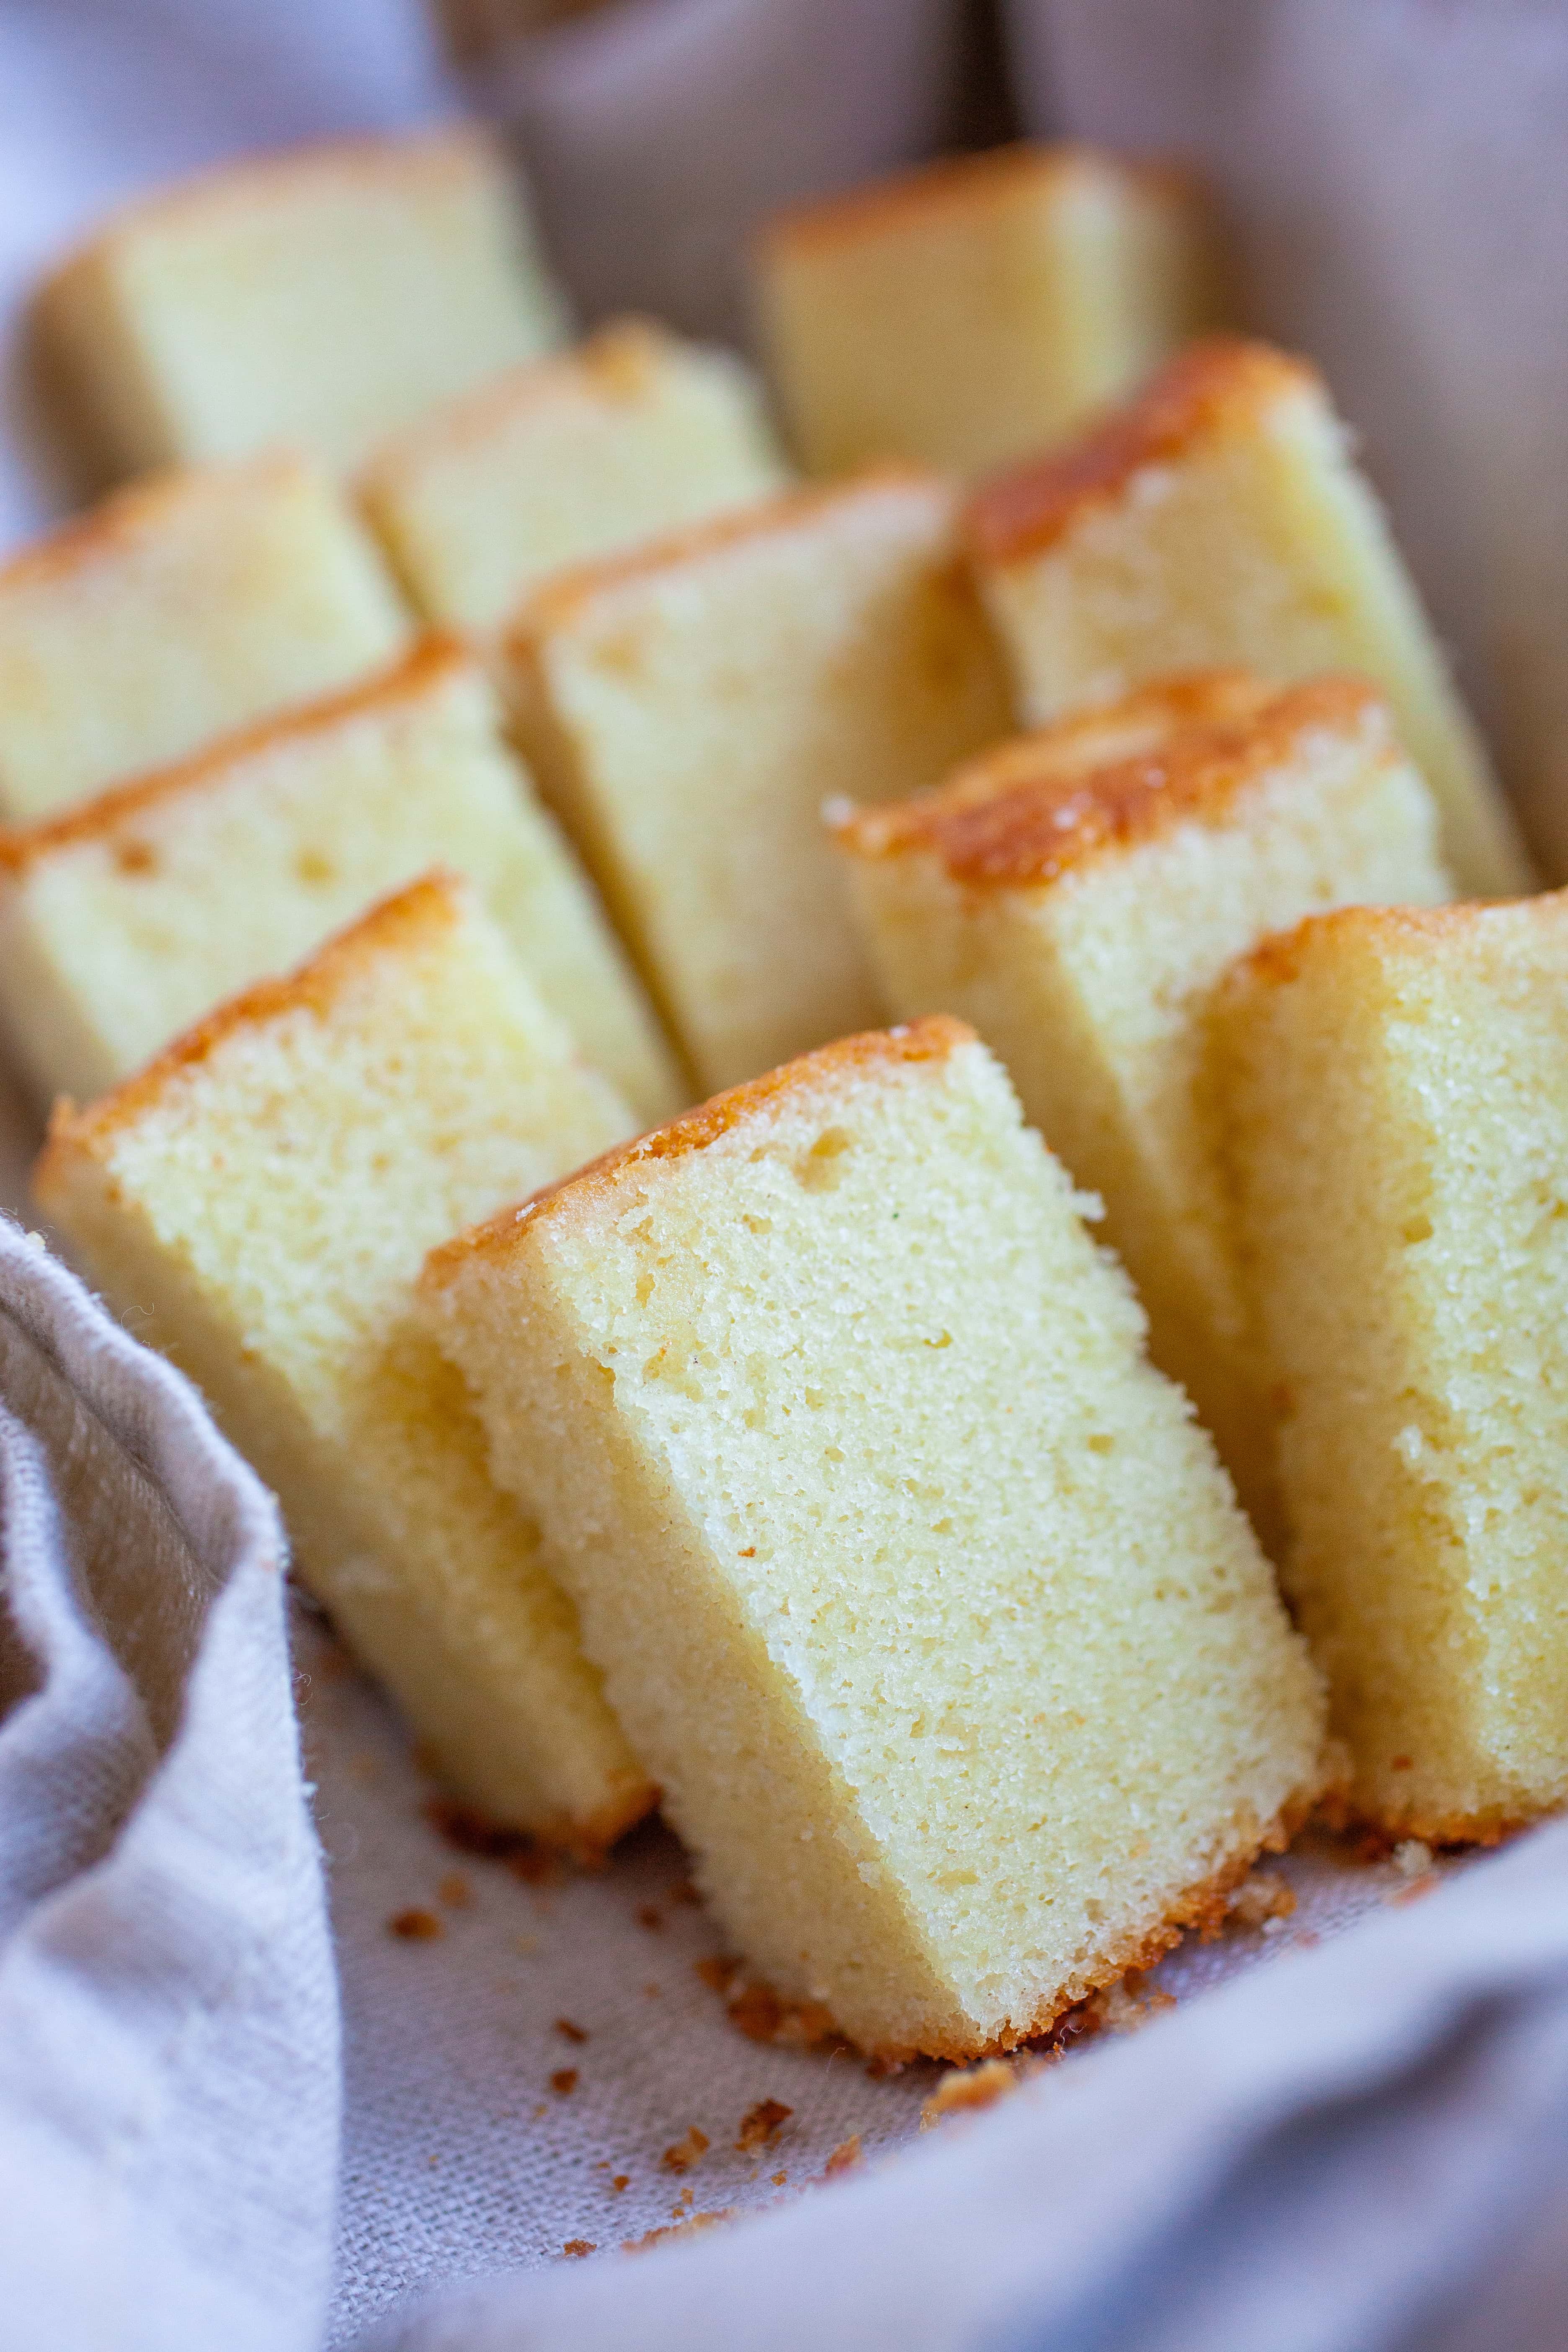 Small pieces of butter cake.